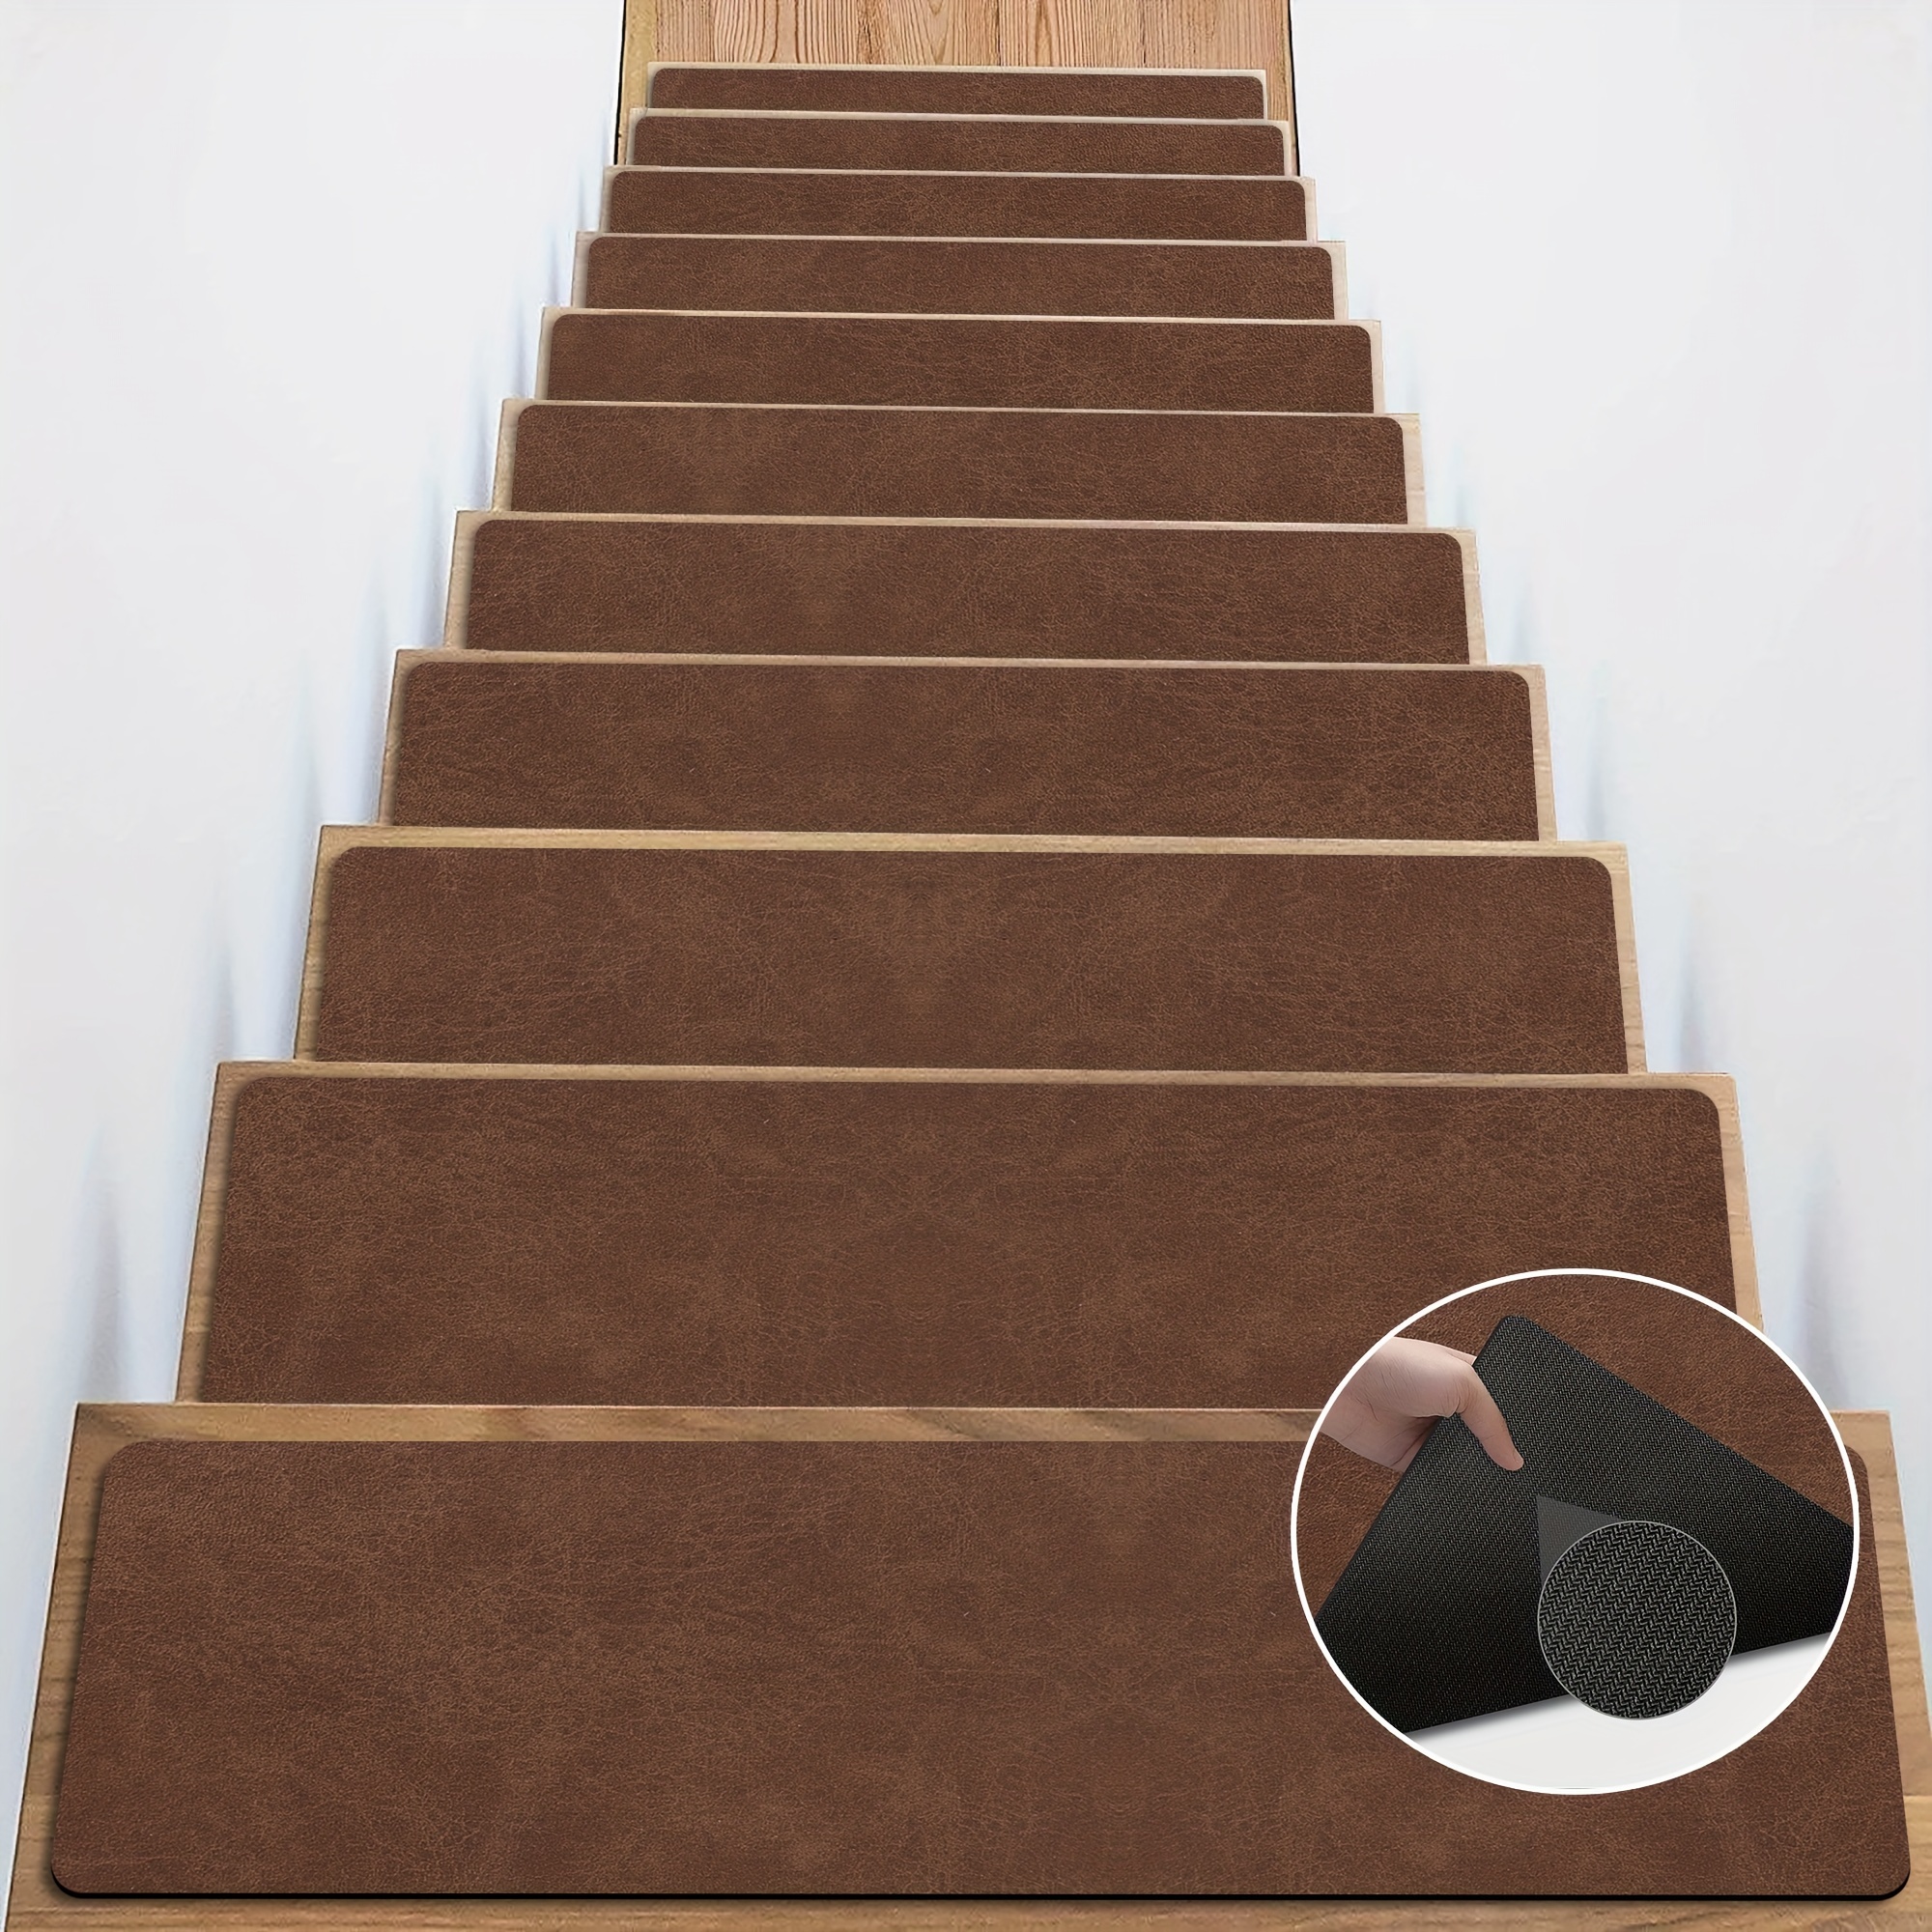 

7packs/15packs Non-slip Rubber Stair Treads, 8"x30" Step Mats For Wooden Stairs, Reusable Stairway Carpets Strips Rugs Set, Washable Stair Pads, Staircase Step Carpet Treads